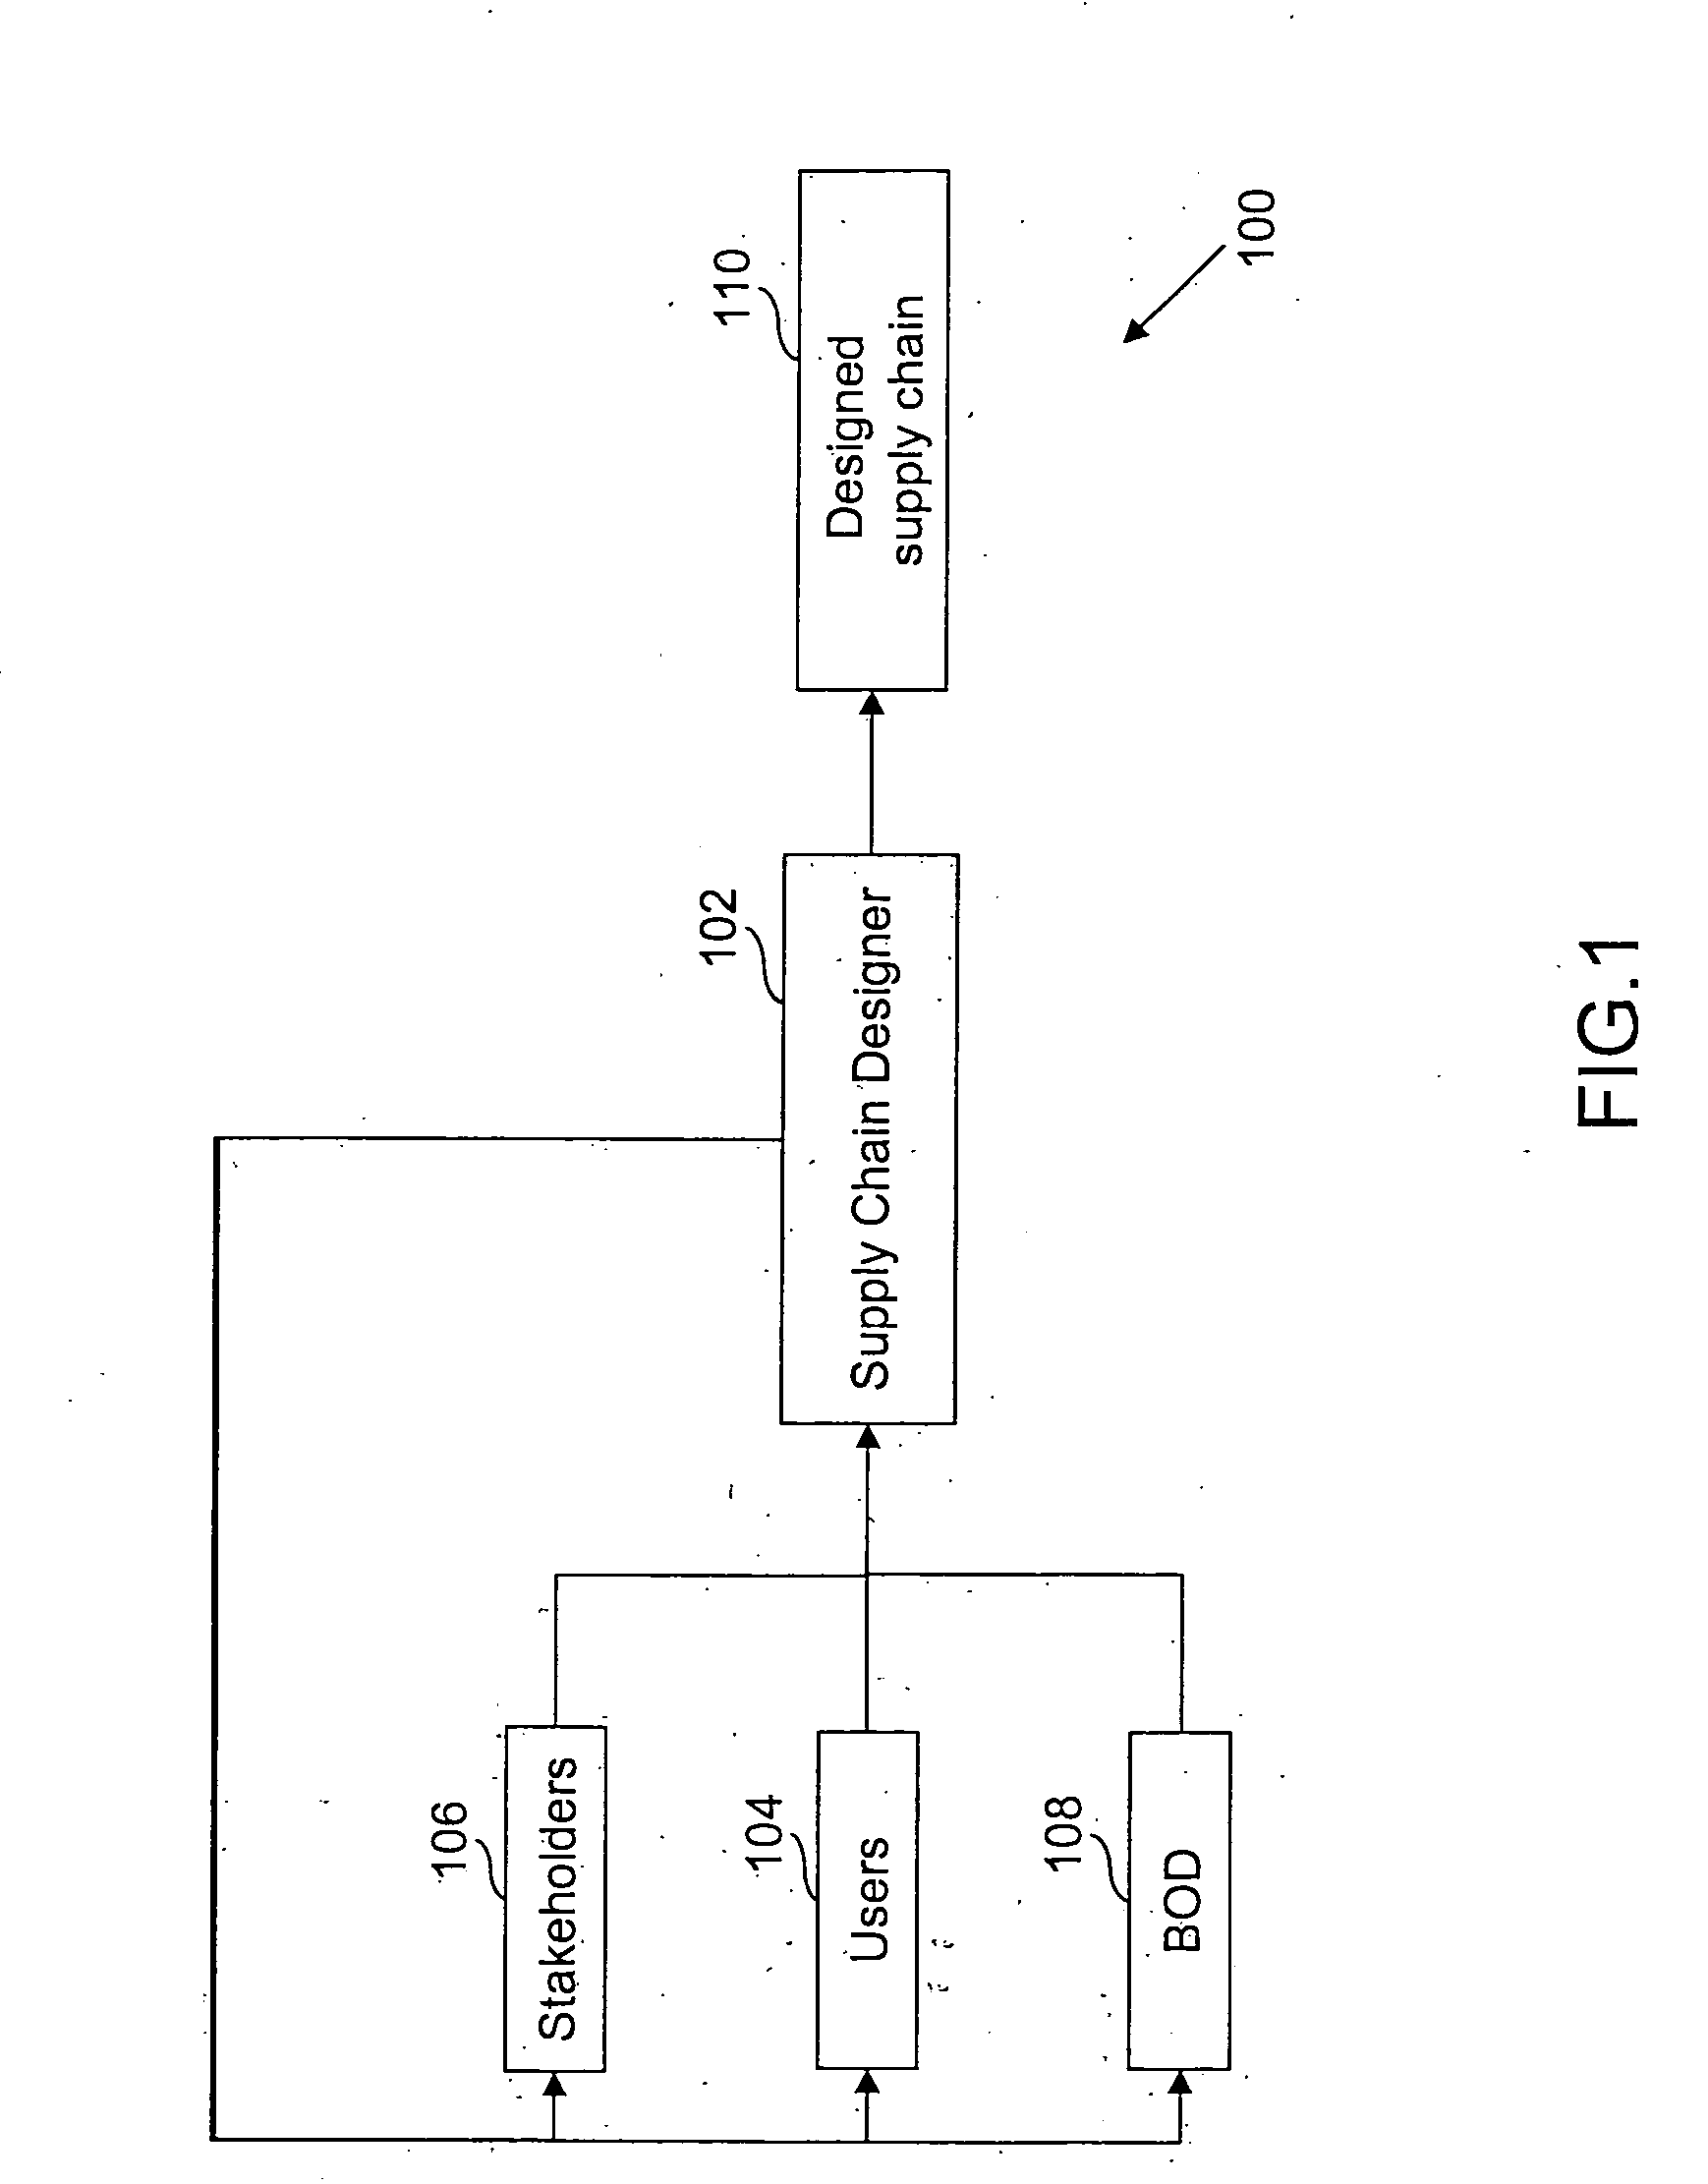 System and method for designing a supply chain